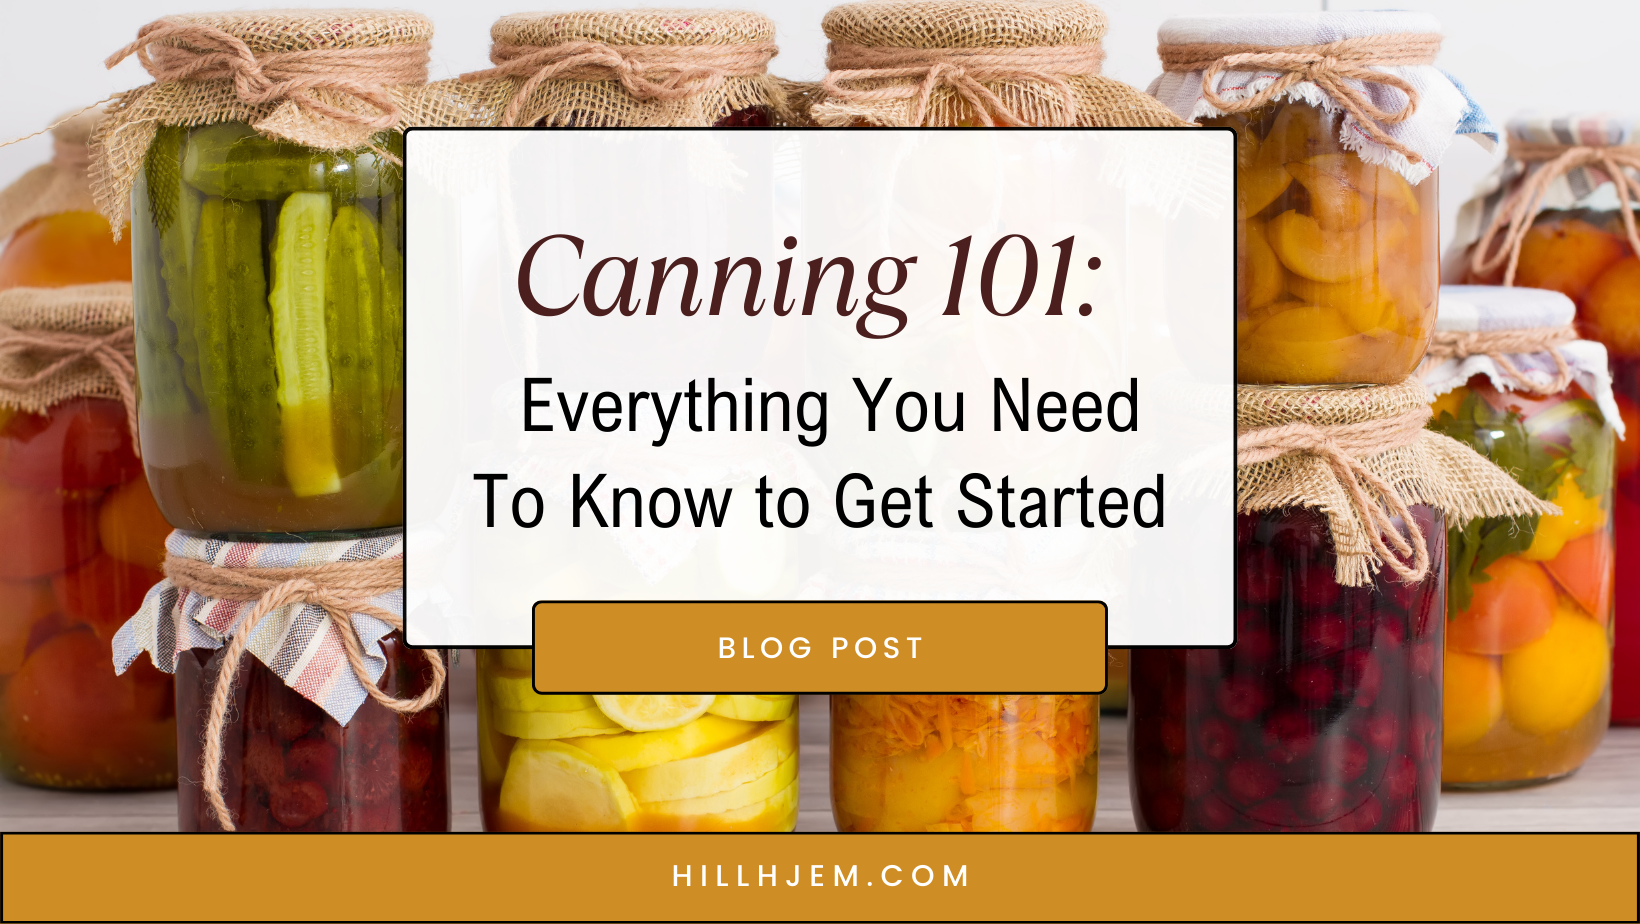 Canning 101: Everything You Need to Know to Get Started